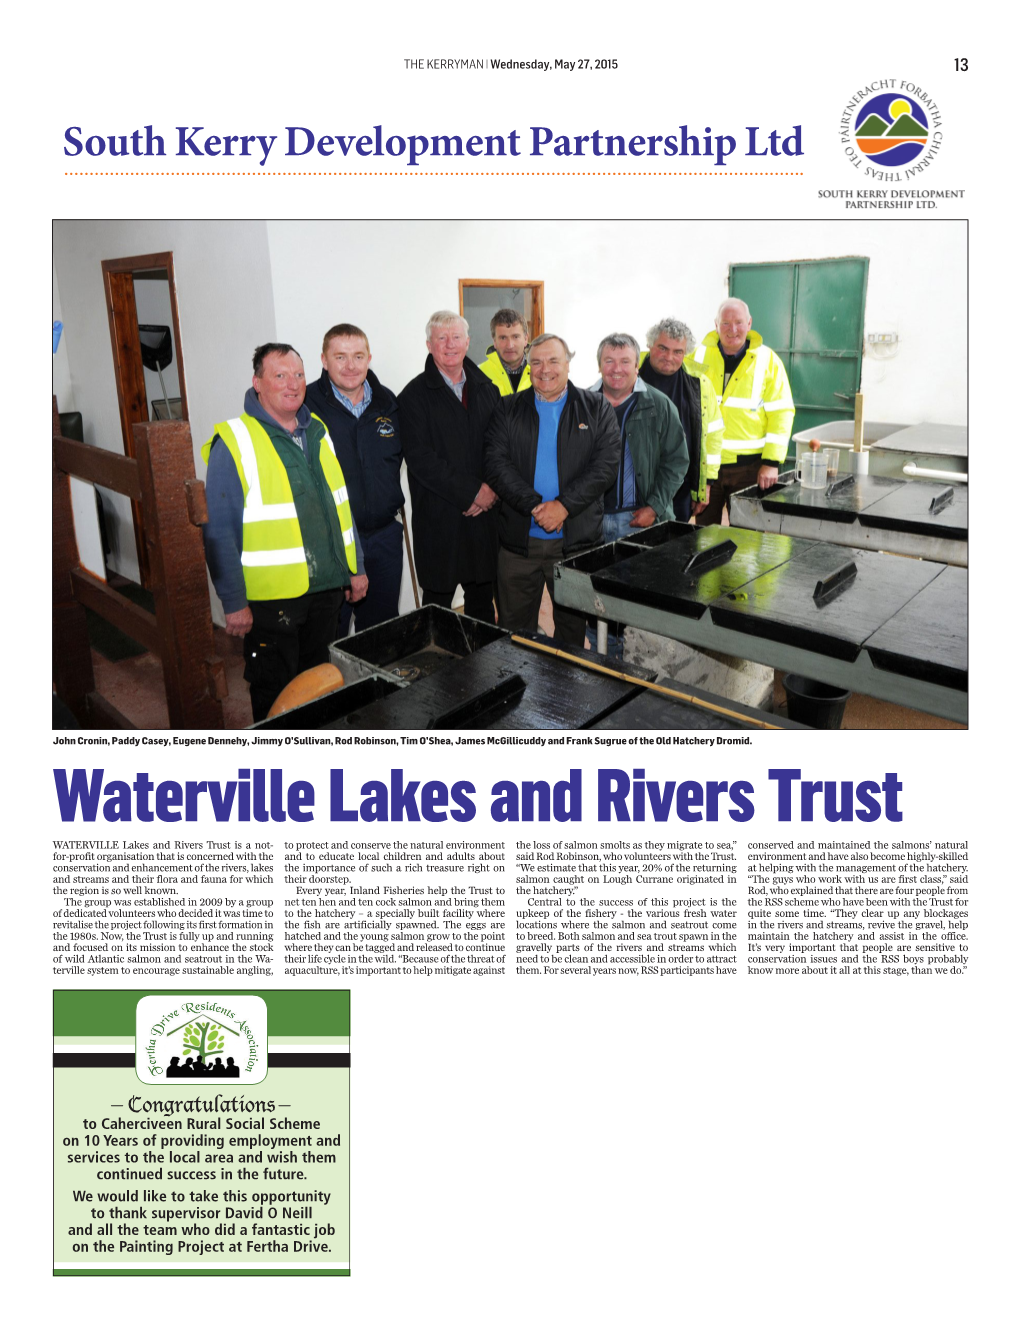 Waterville Lakes and Rivers Trust